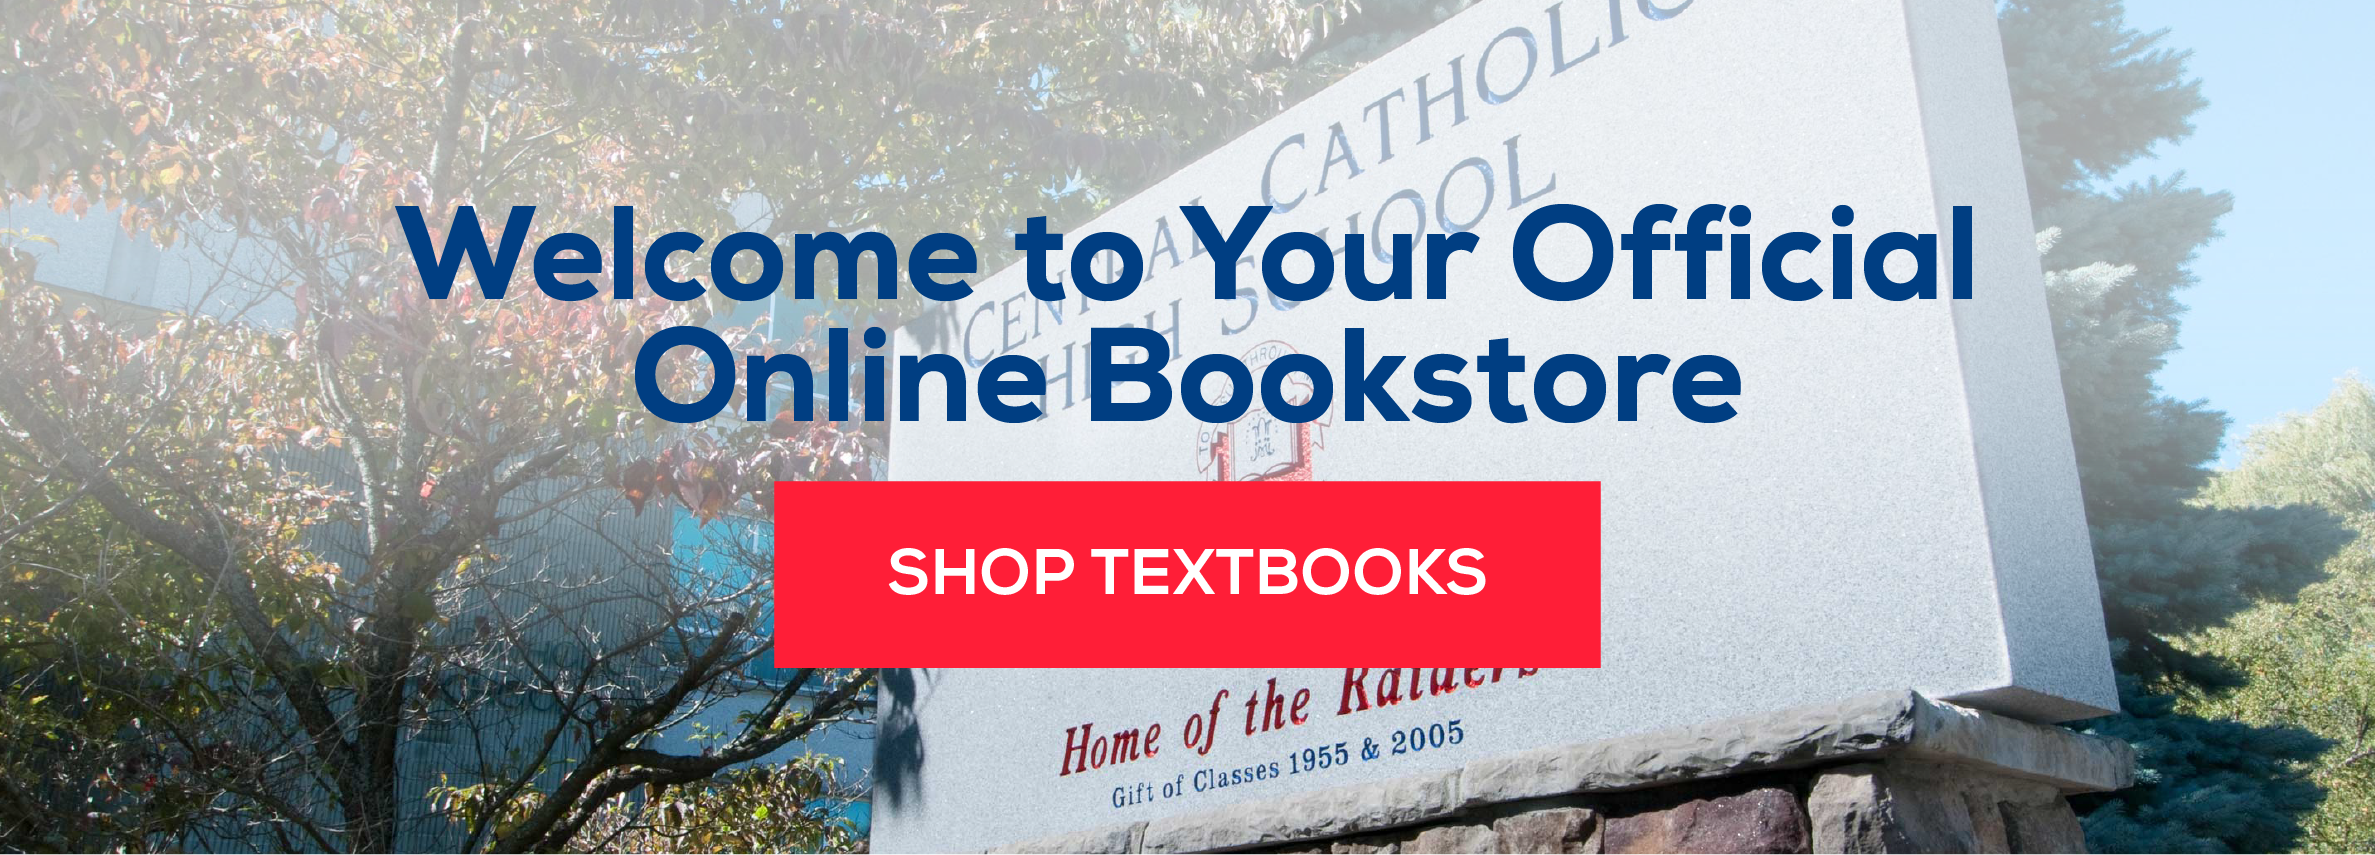 Welcome to your official online bookstore Shop Textbooks